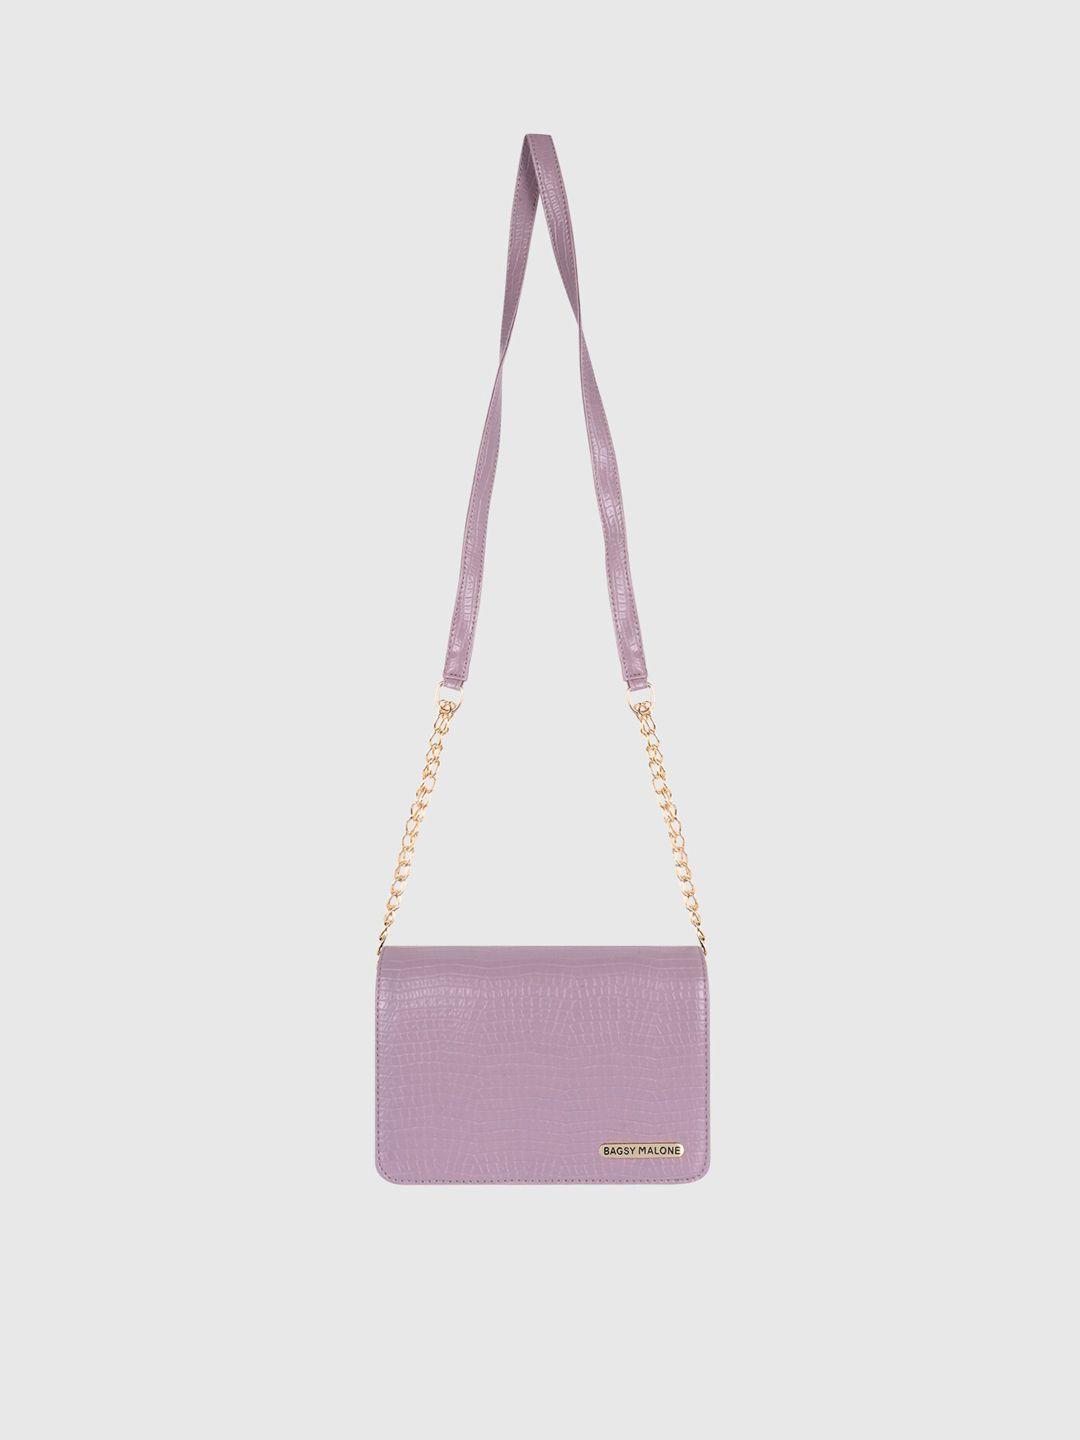 bagsy malone lavender textured structured sling bag